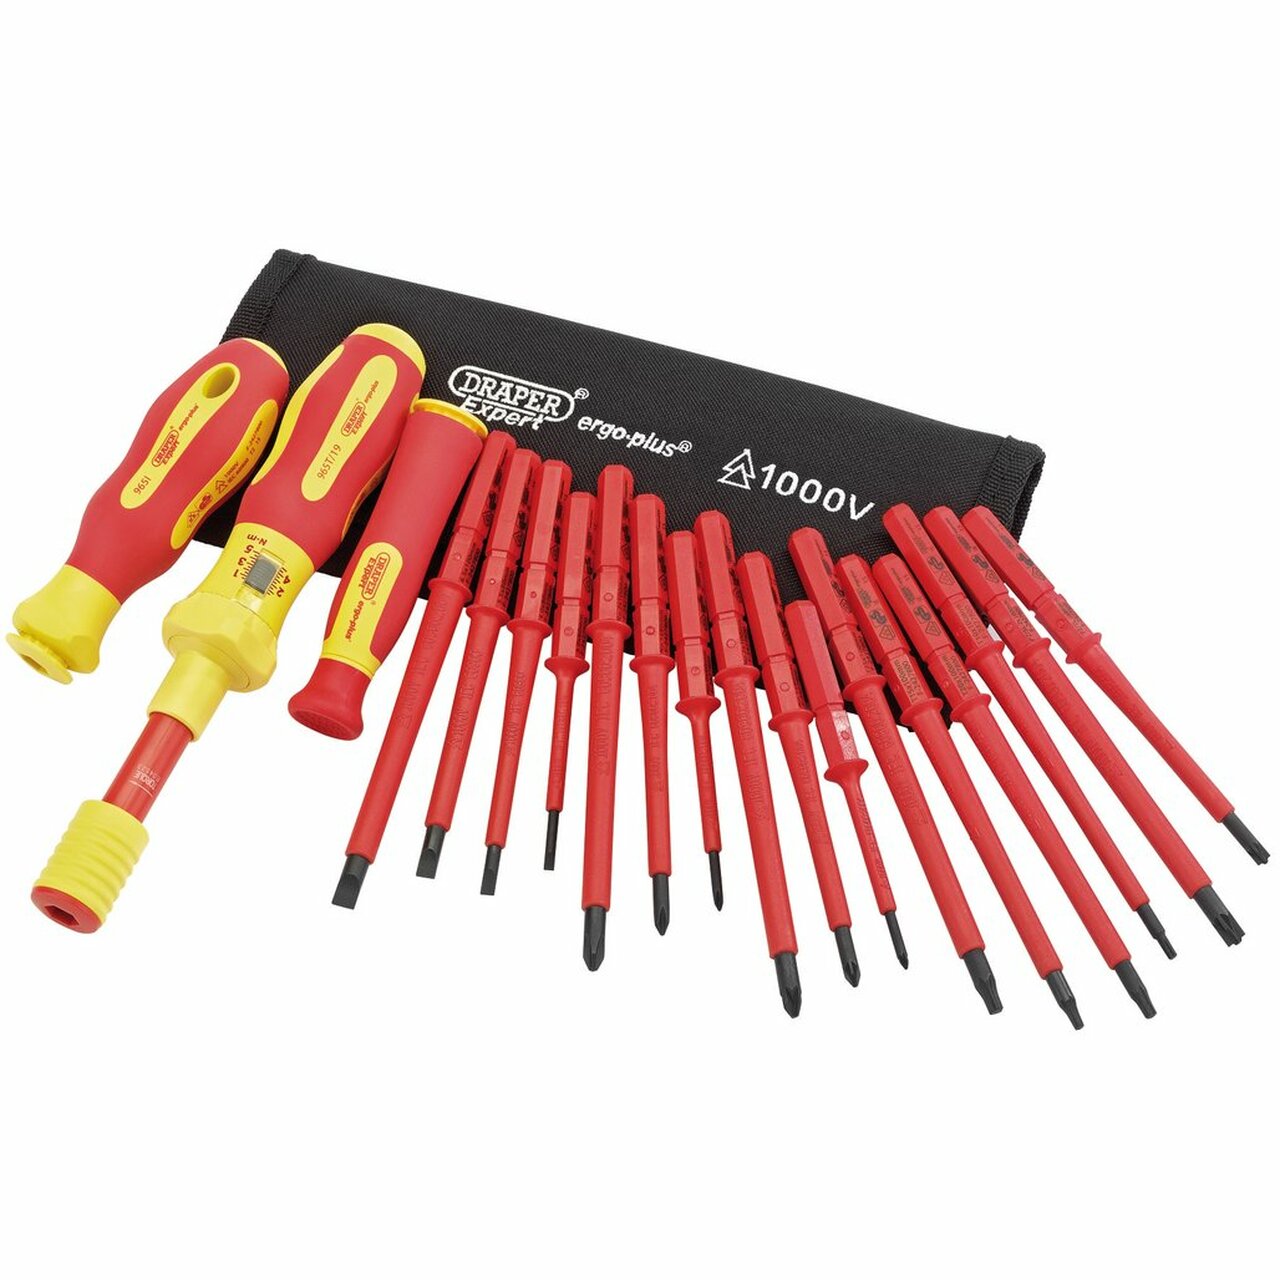 draper-88608-vde-approved-fully-insulated-screwdriver-set-7-pieces